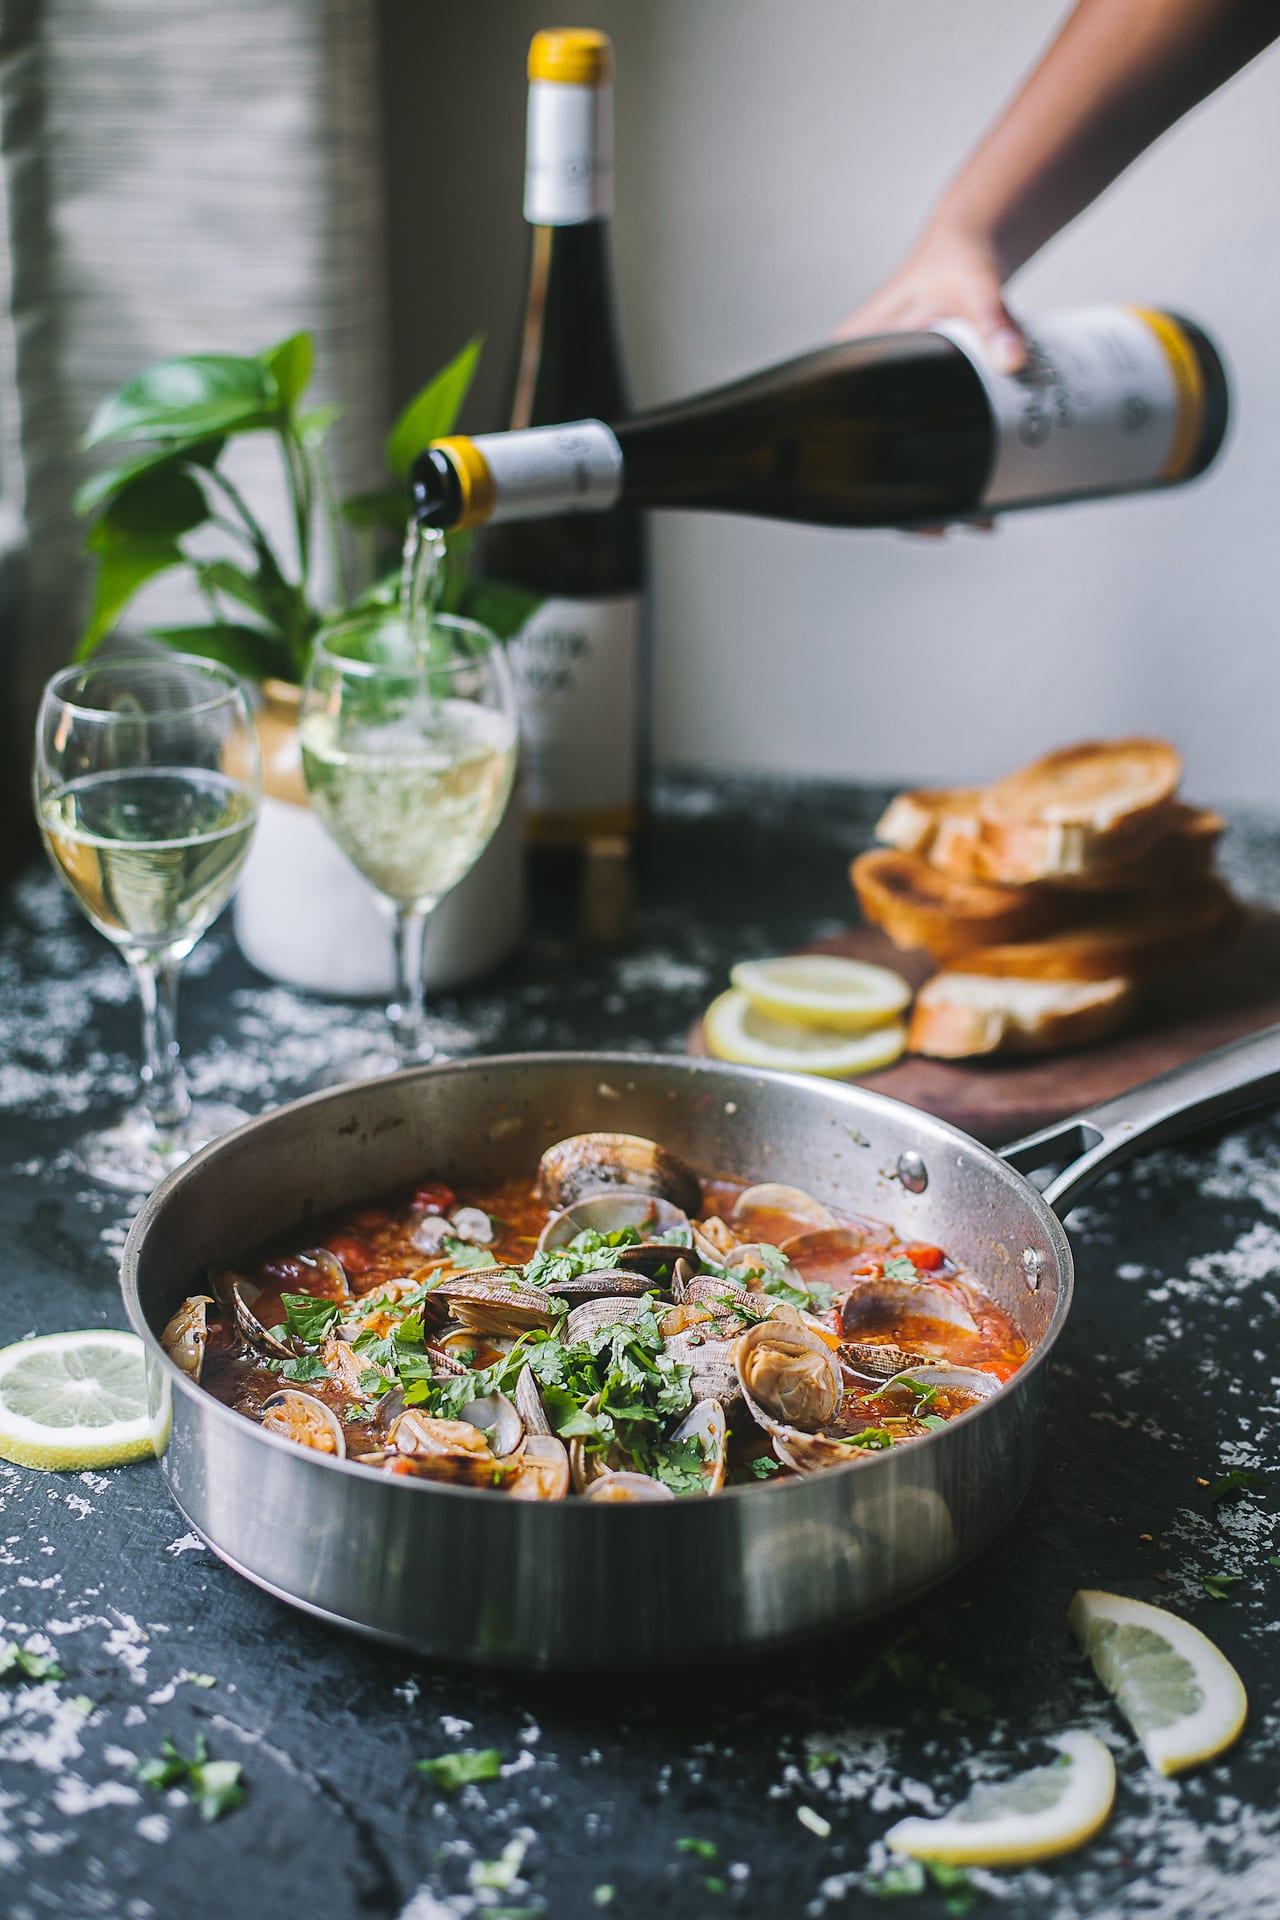 Pour a glass of wine | Playful Cooking #foodphotography #wine #foodphotography #seafood #clams